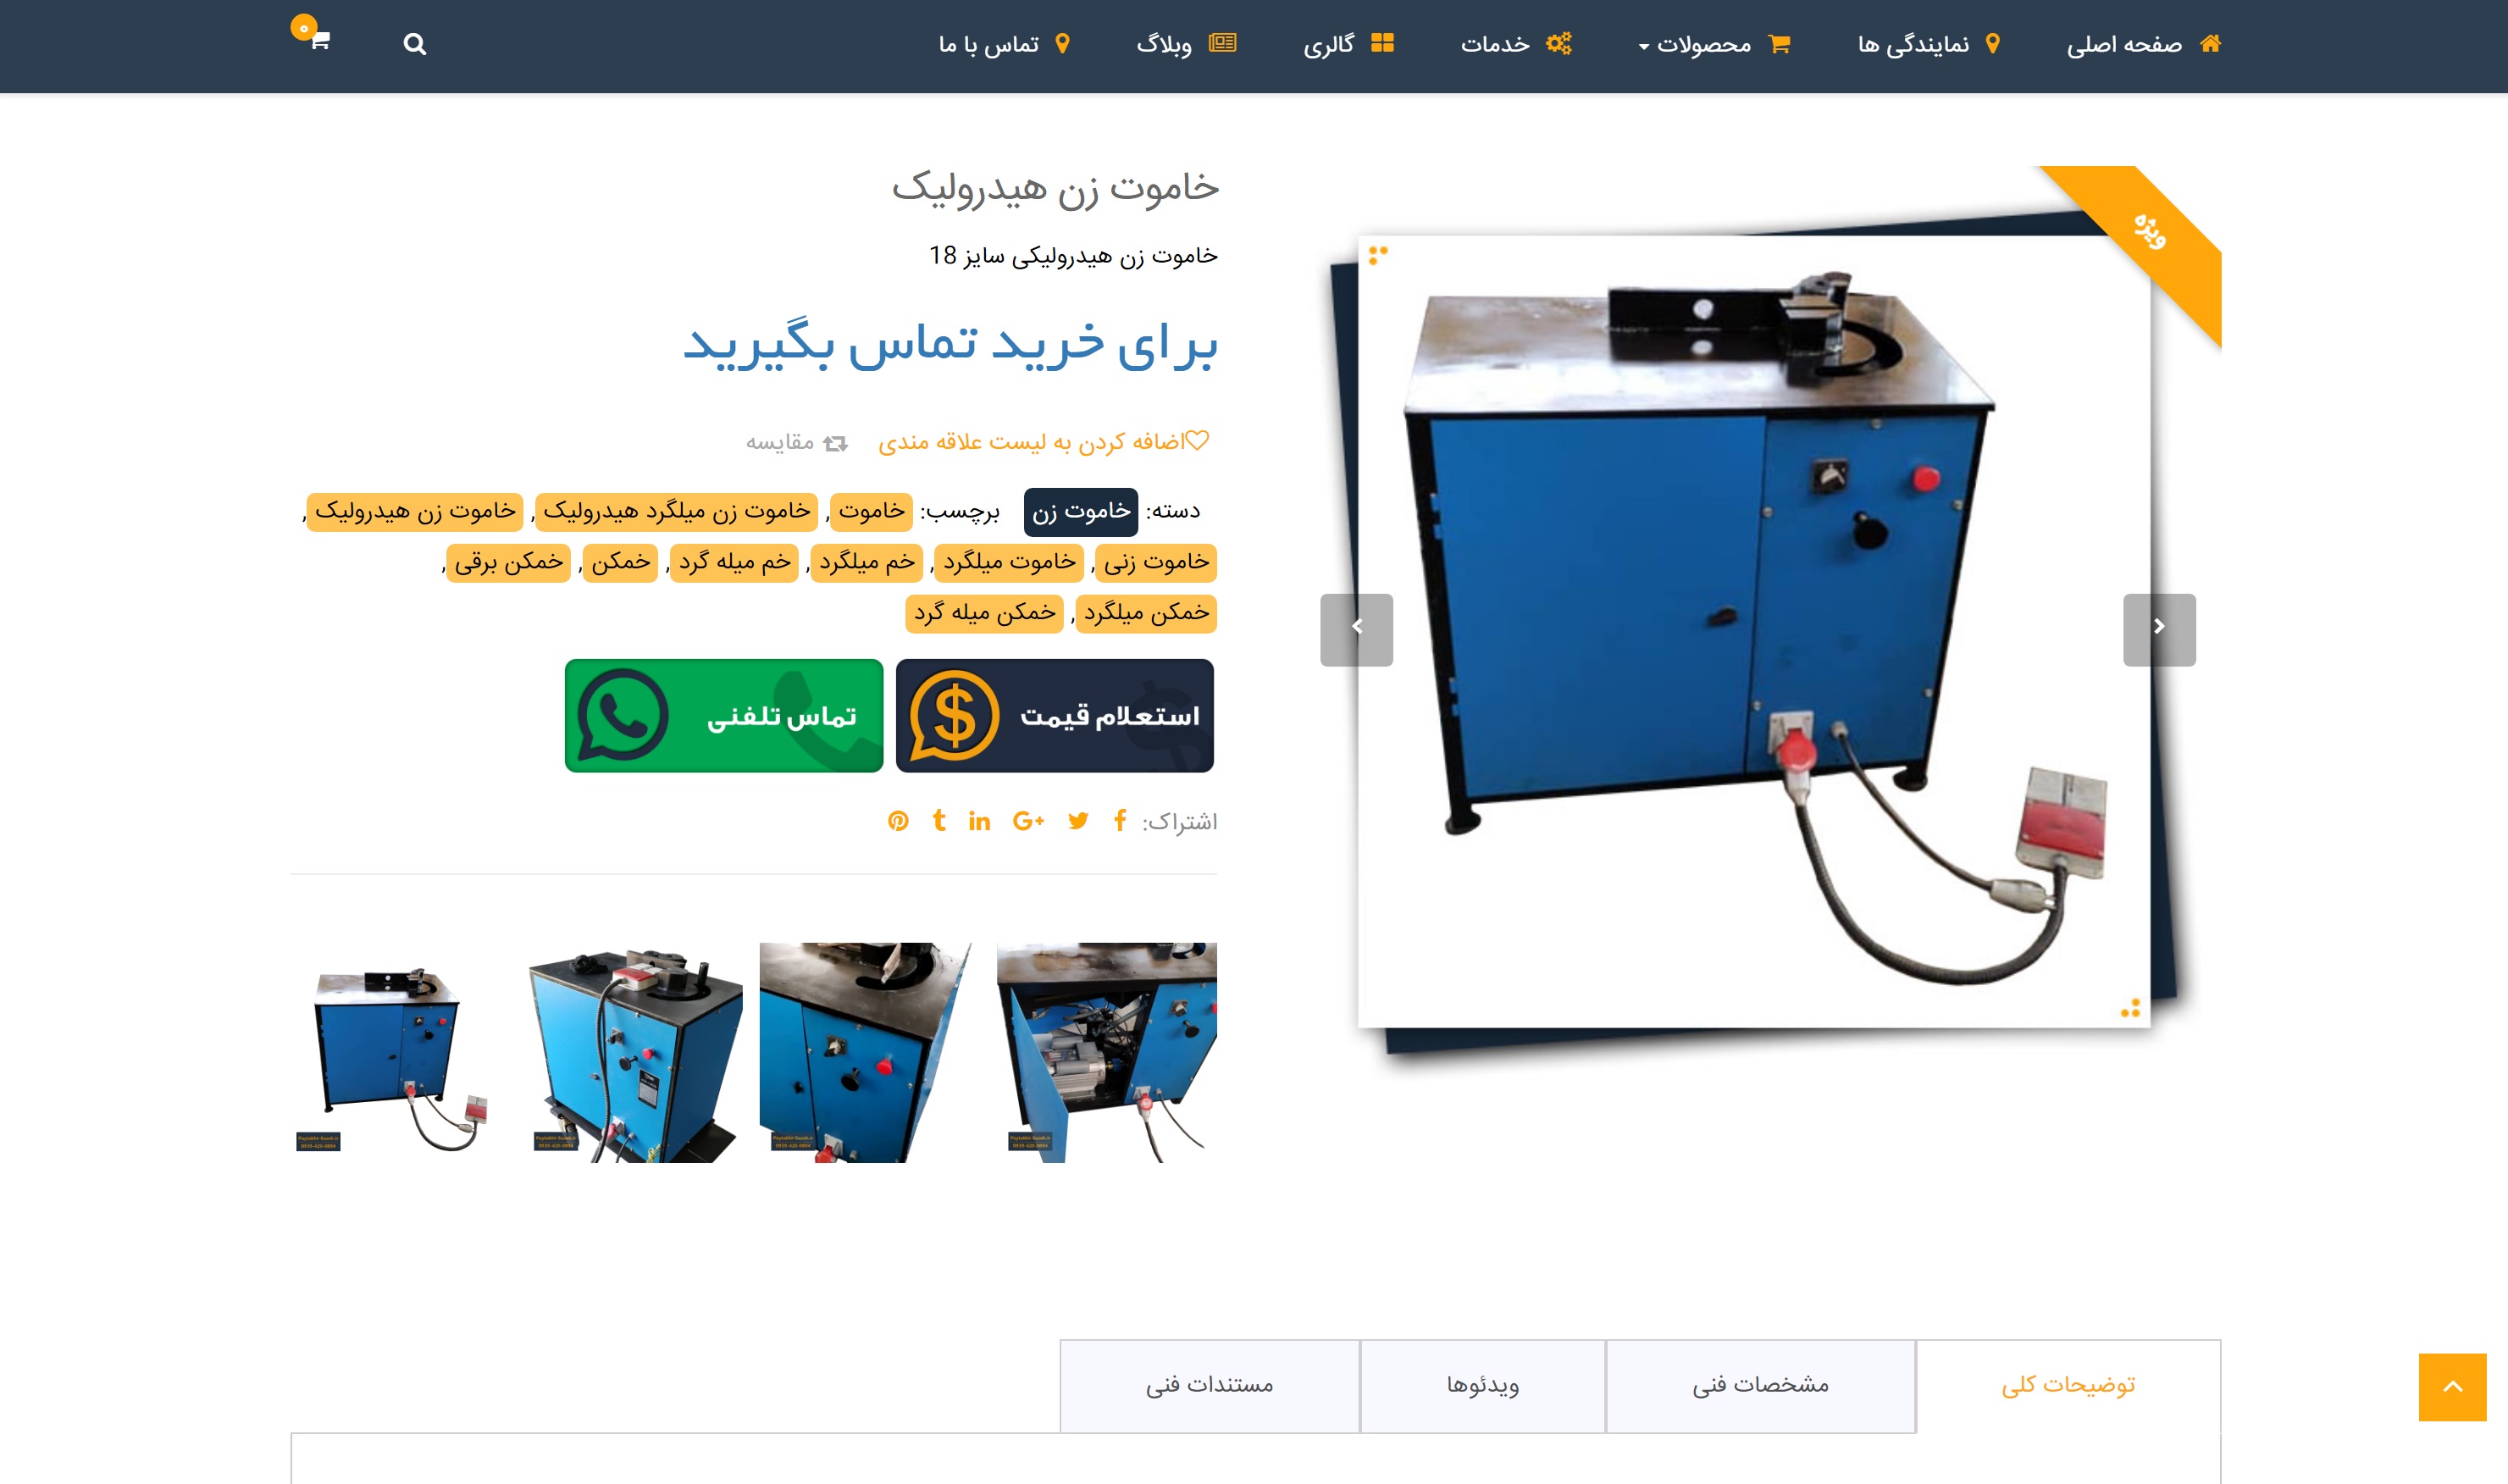 Shahinsoft.ir Paytakht Sazeh The product page of Paytakht Sazeh